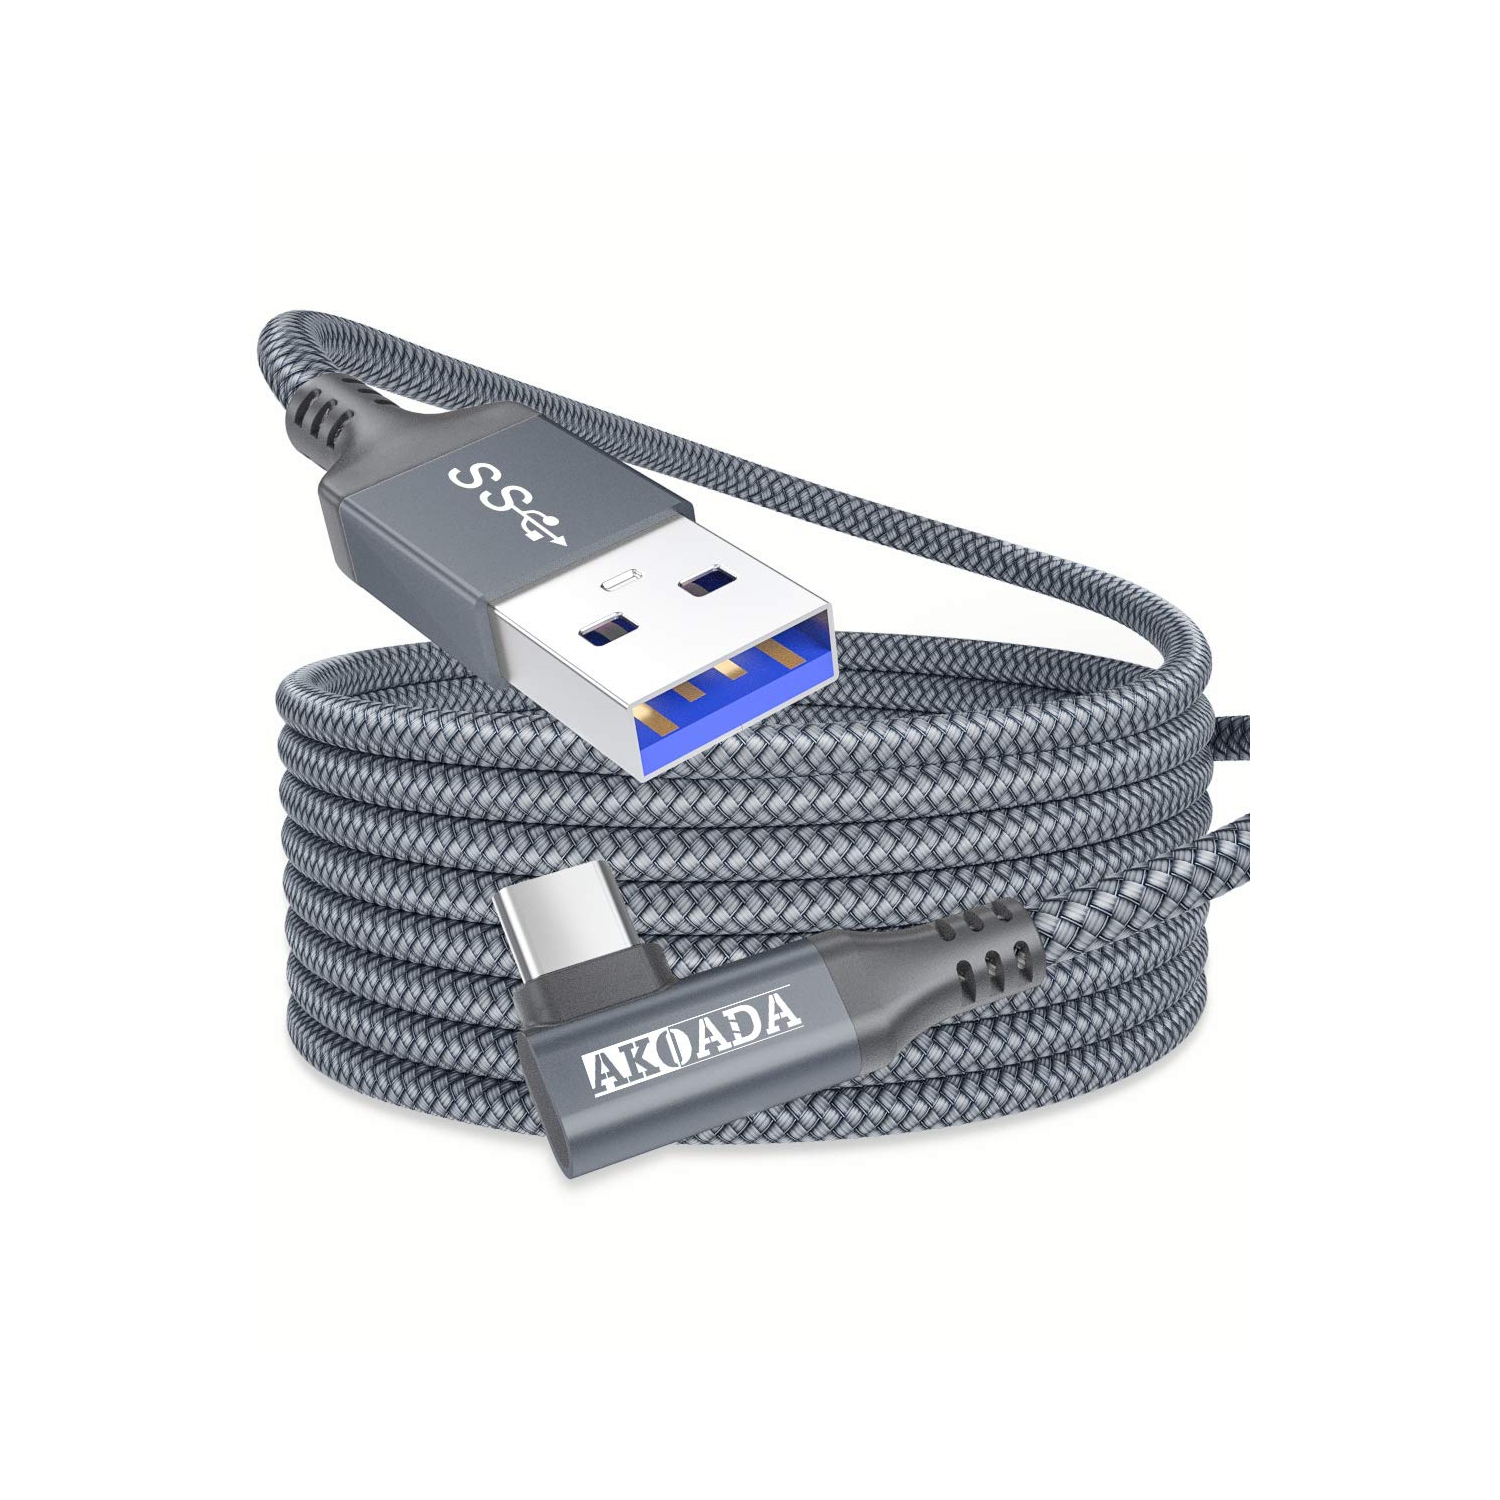 Link Cable for Oculus Quest 2, 16FT USB A to Type C 3.0 5Gbps VR High Speed Data Transfer & Charging Cable